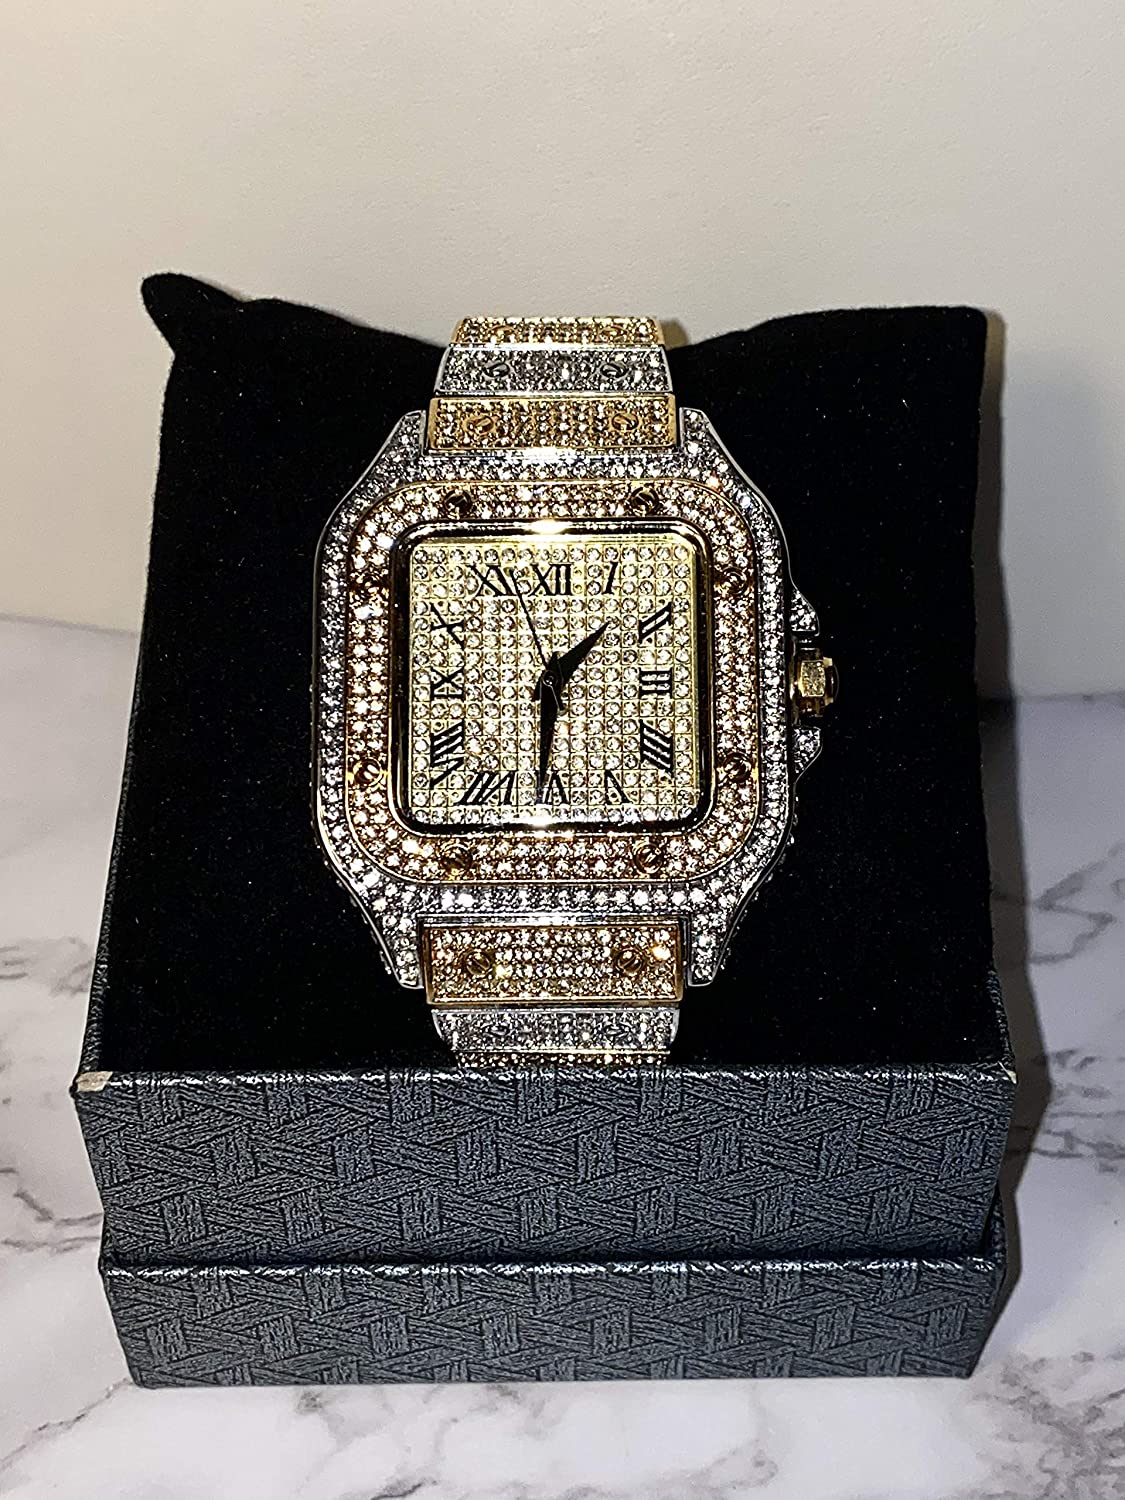 Men's Wrist Watch Band Luxury CZ Diamond Iced Out Watch Gold Roman Numeric Square Dial Watch For Men Women Hip Hop Rapper Choice, Men Watch, Mens Jewelry, Iced Watch Custom Fit, Bust Down Watch